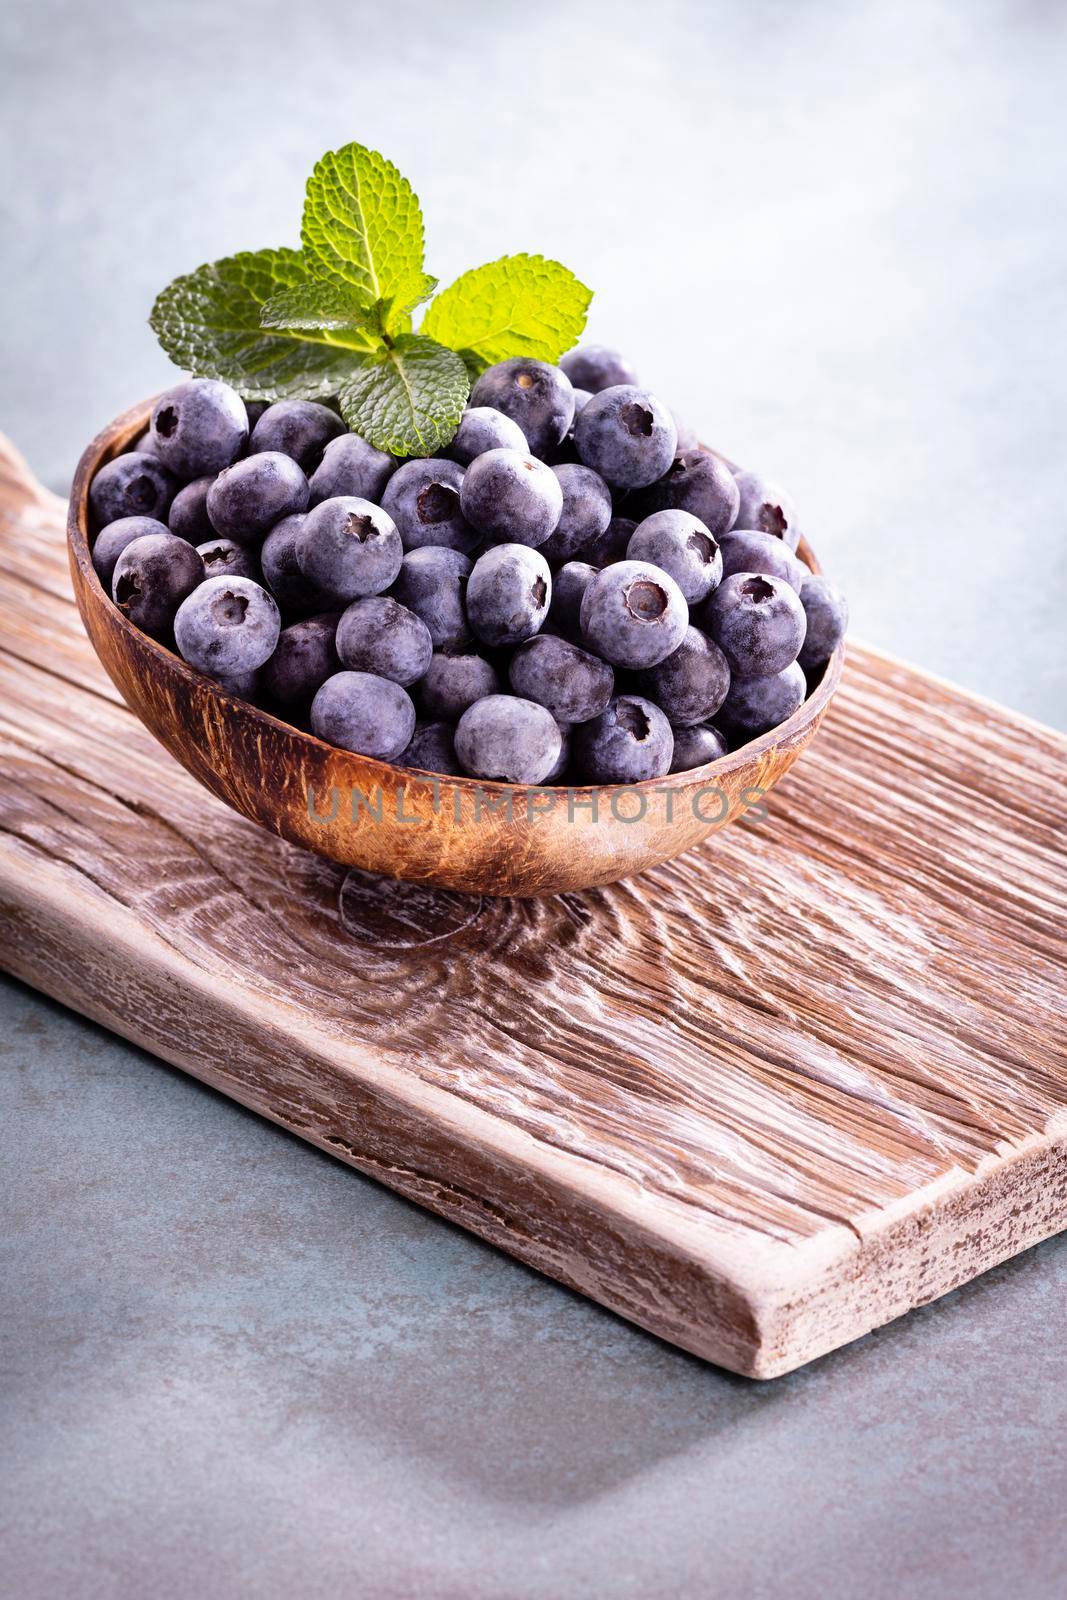 Bowl of fresh blueberries on rustic wooden board. Organic food blueberries and mint leaf for healthy lifestyle. by gitusik